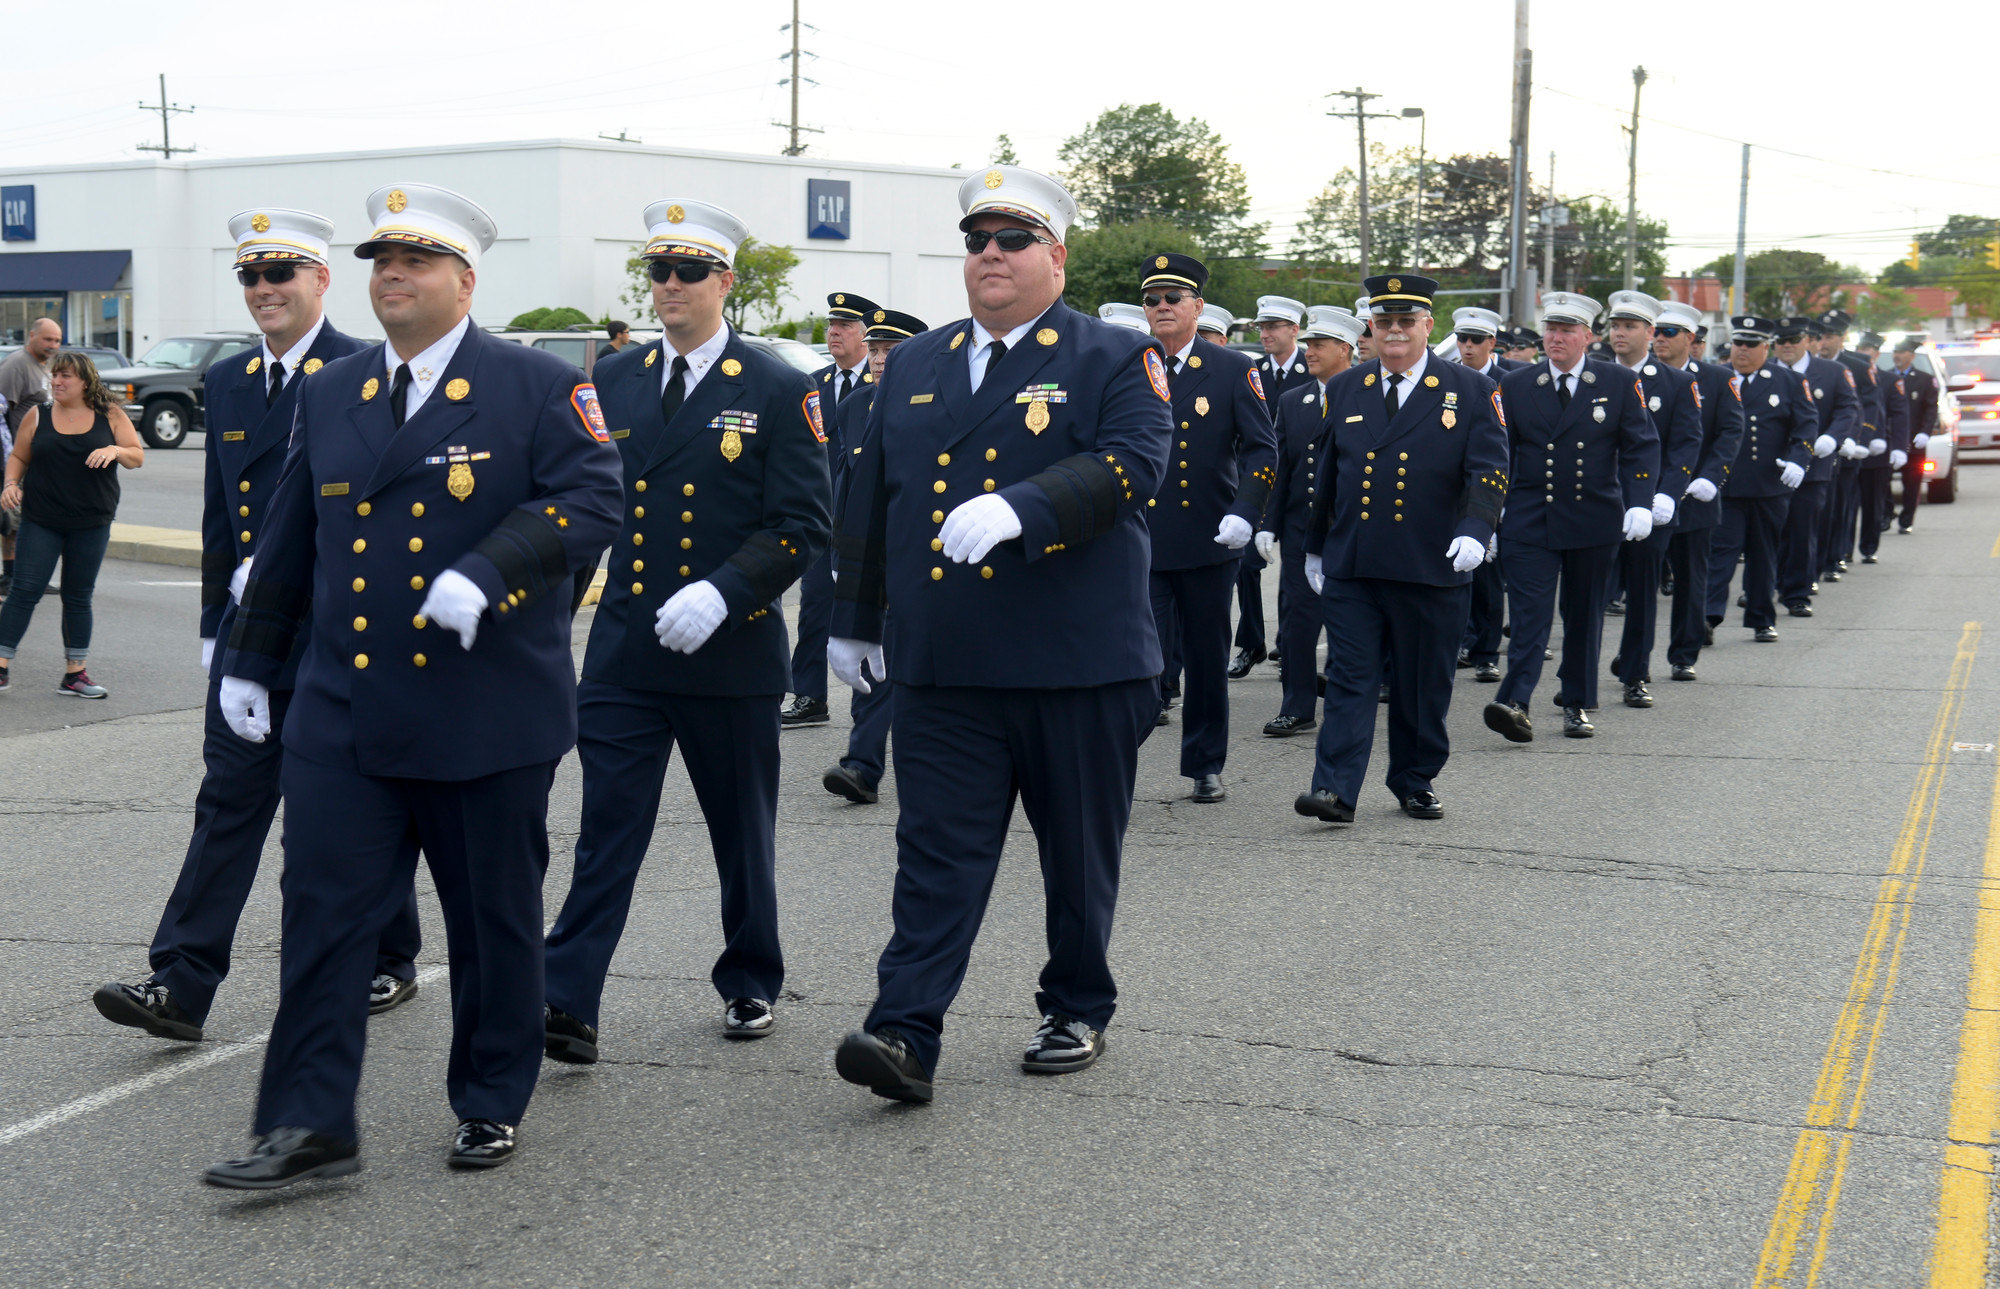 The marchers from the Oceanside Fire Department.